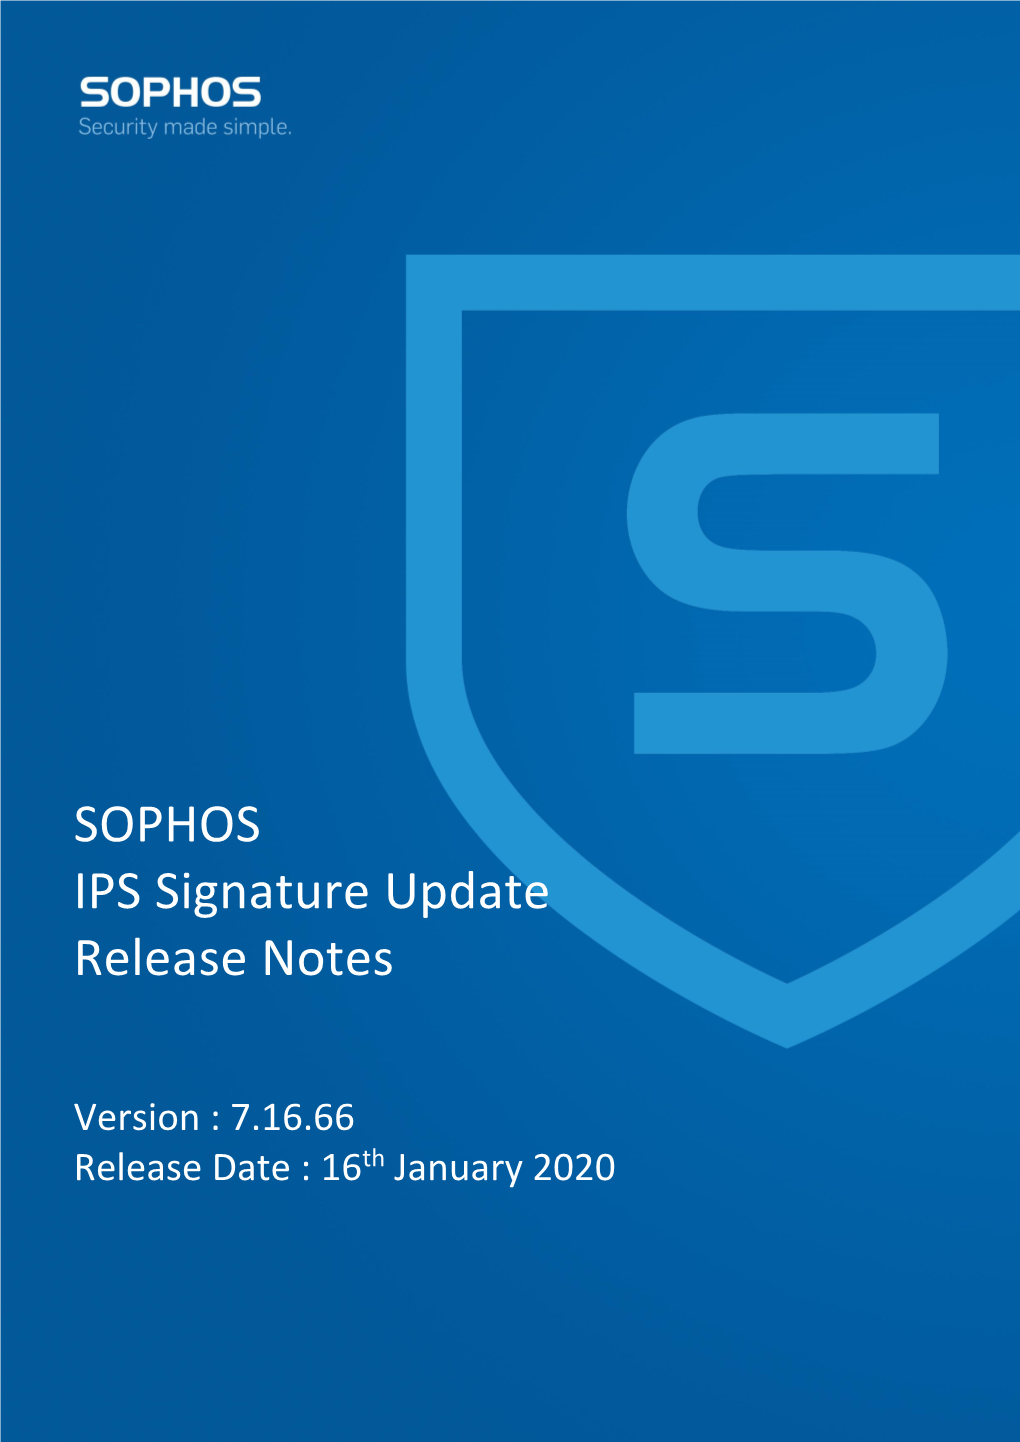 IPS Signature Release Note V7.16.66